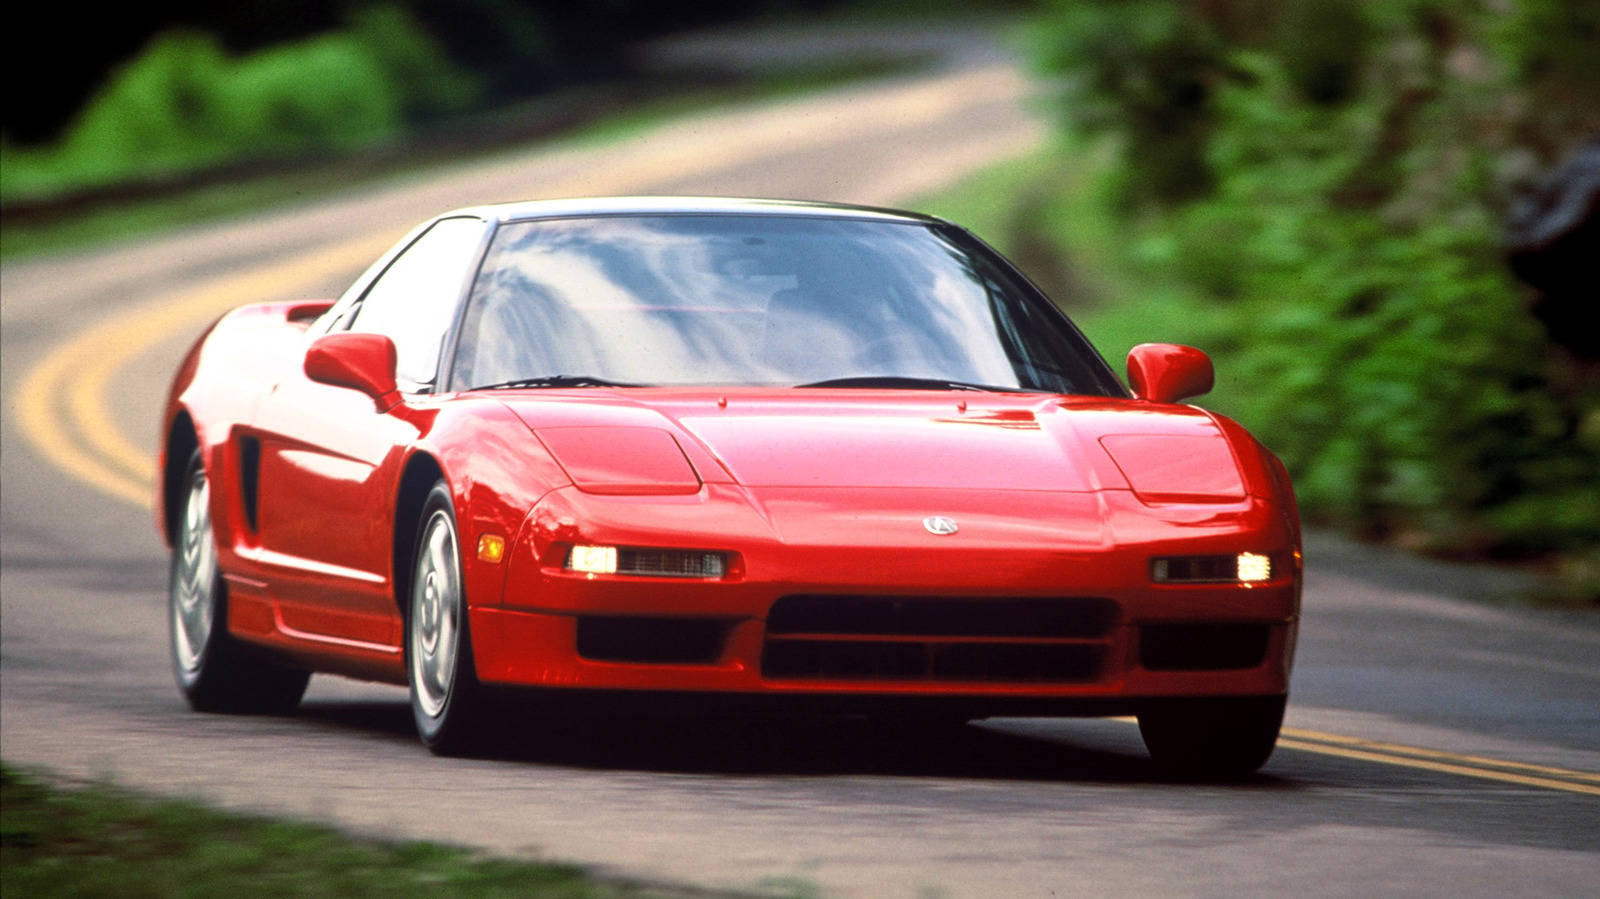 10 Of The Most Successful Models In Honda History